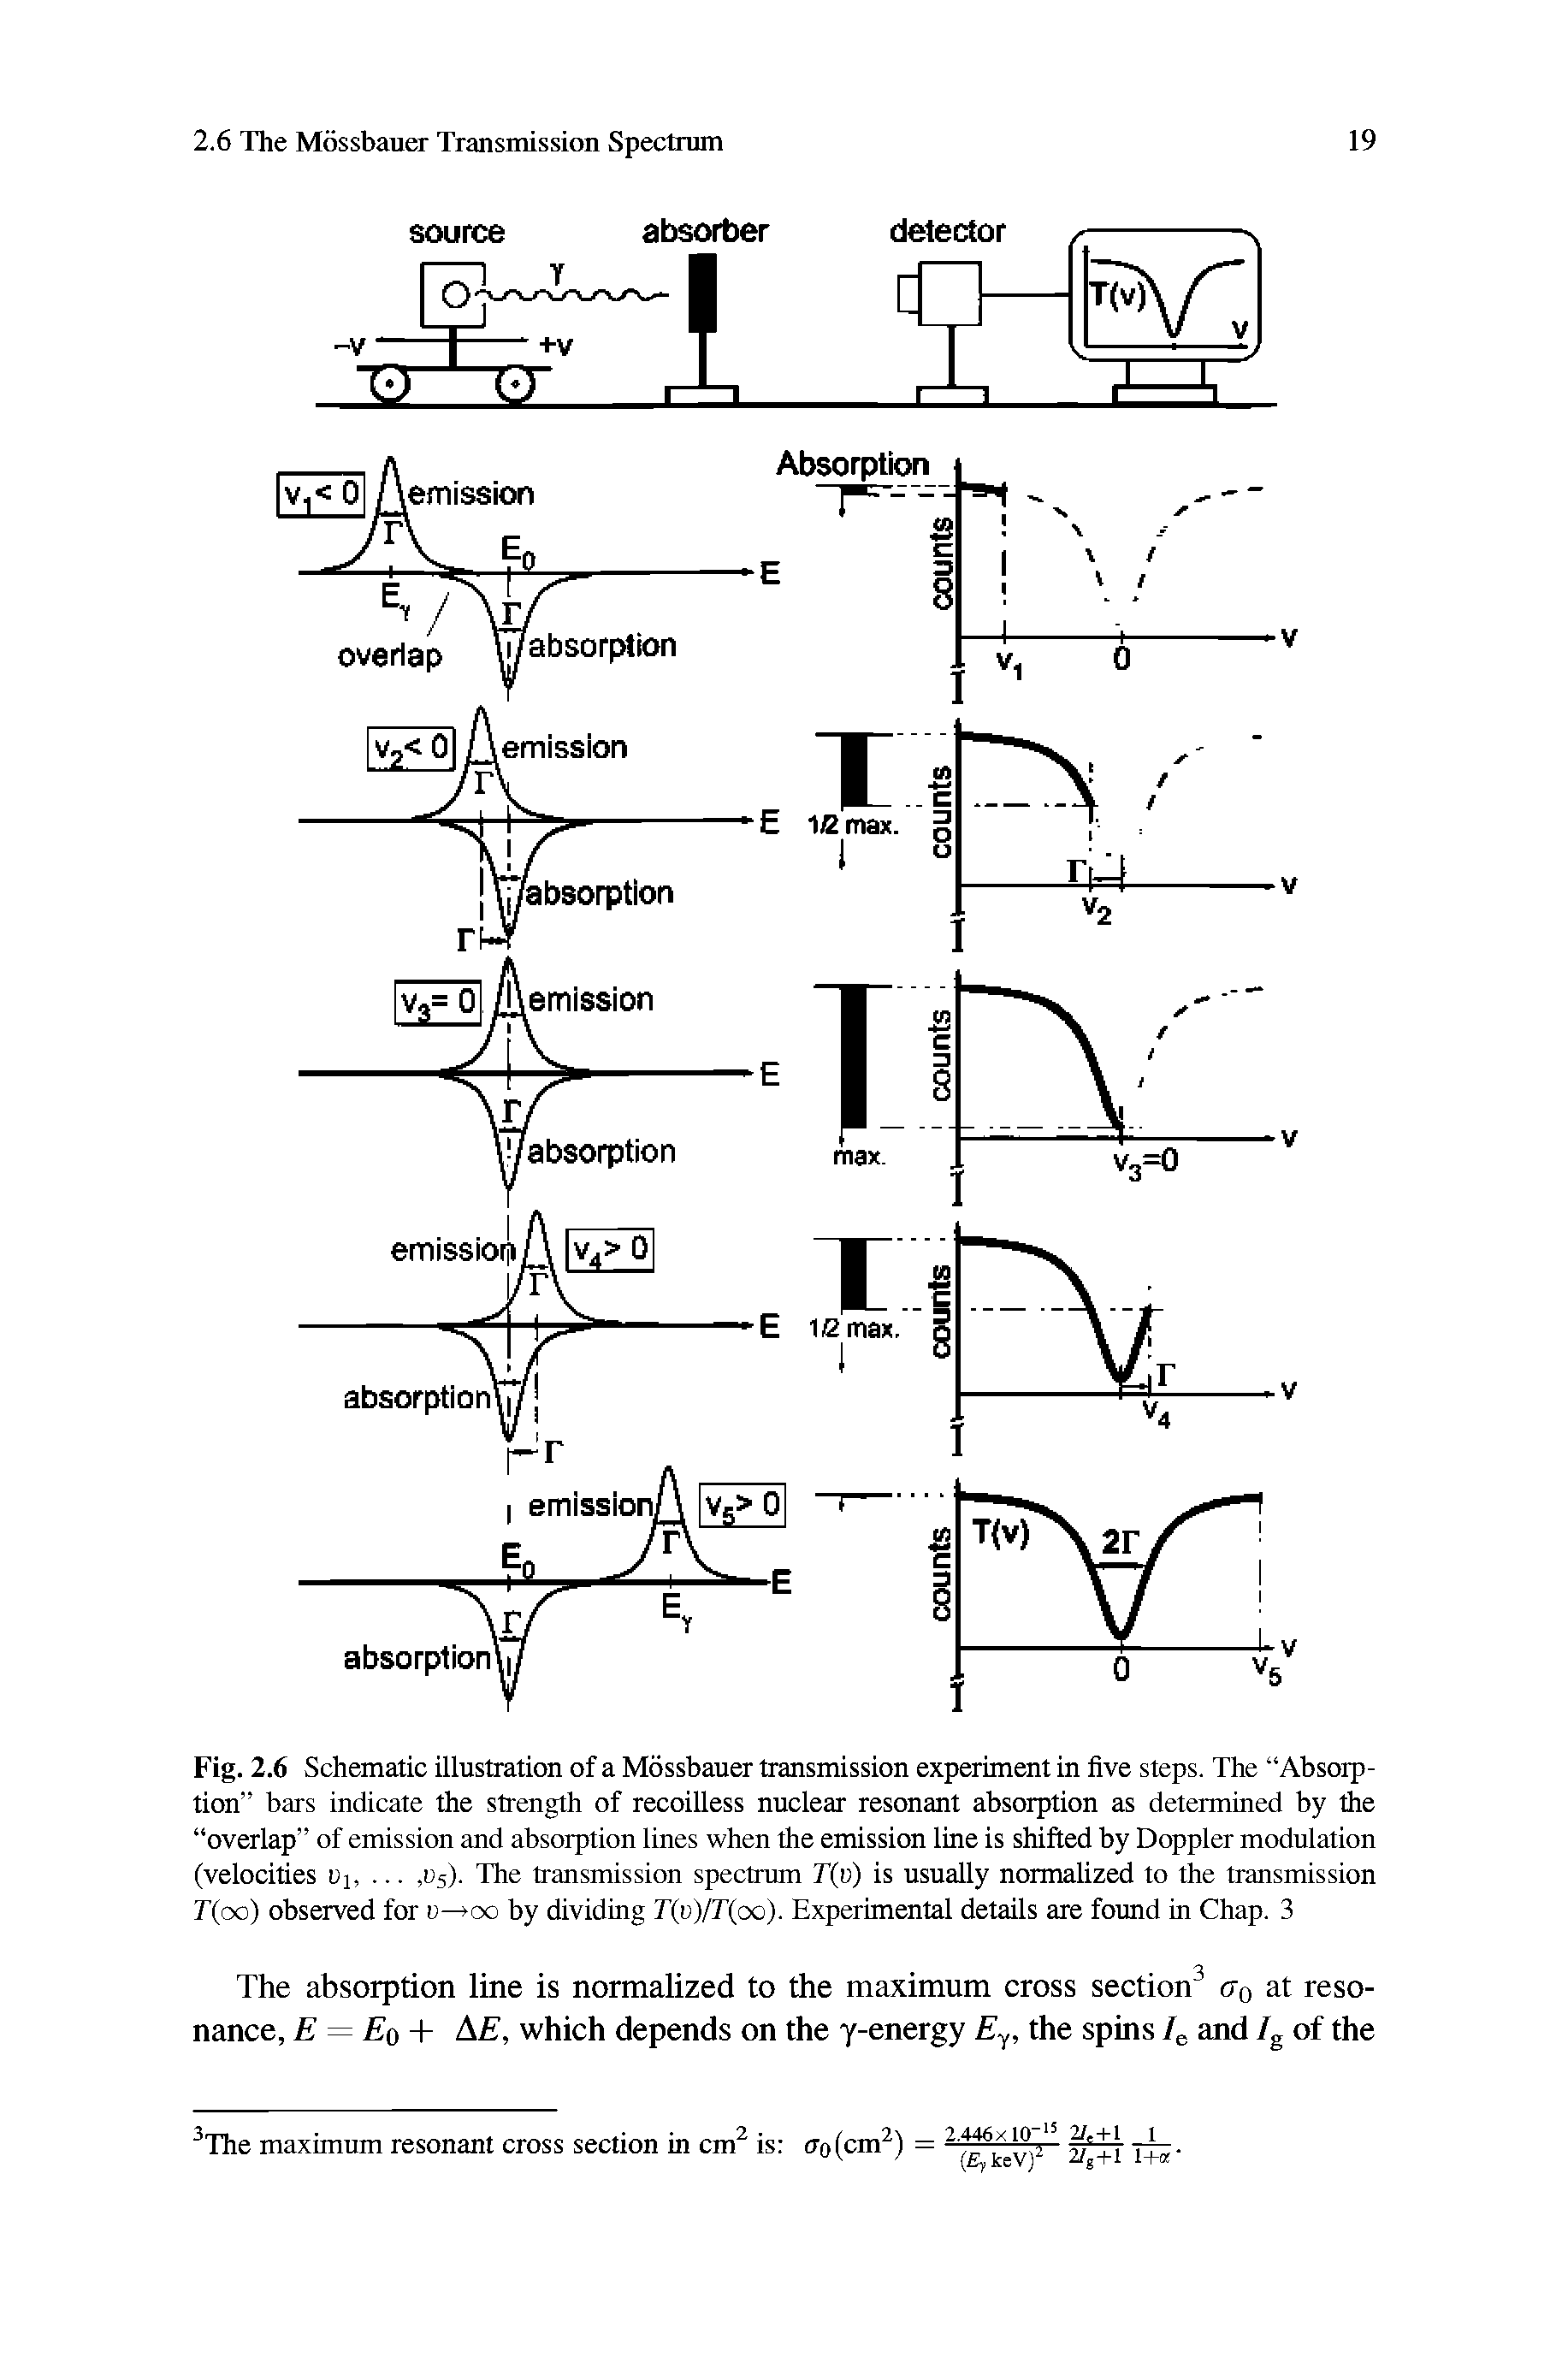 Fig. 2.6 Schematic illustration of a Mossbauer transmission experiment in five steps. The Absorption bars indicate the strength of recoilless nuclear resonant absorption as determined by the overlap of emission and absorption lines when the emission line is shifted by Doppler modulation (velocities Uj,. .., 1)5). The transmission spectrum T v) is usually normalized to the transmission T oo) observed for v oo by dividing T(v)IT(oo). Experimental details are found in Chap. 3...